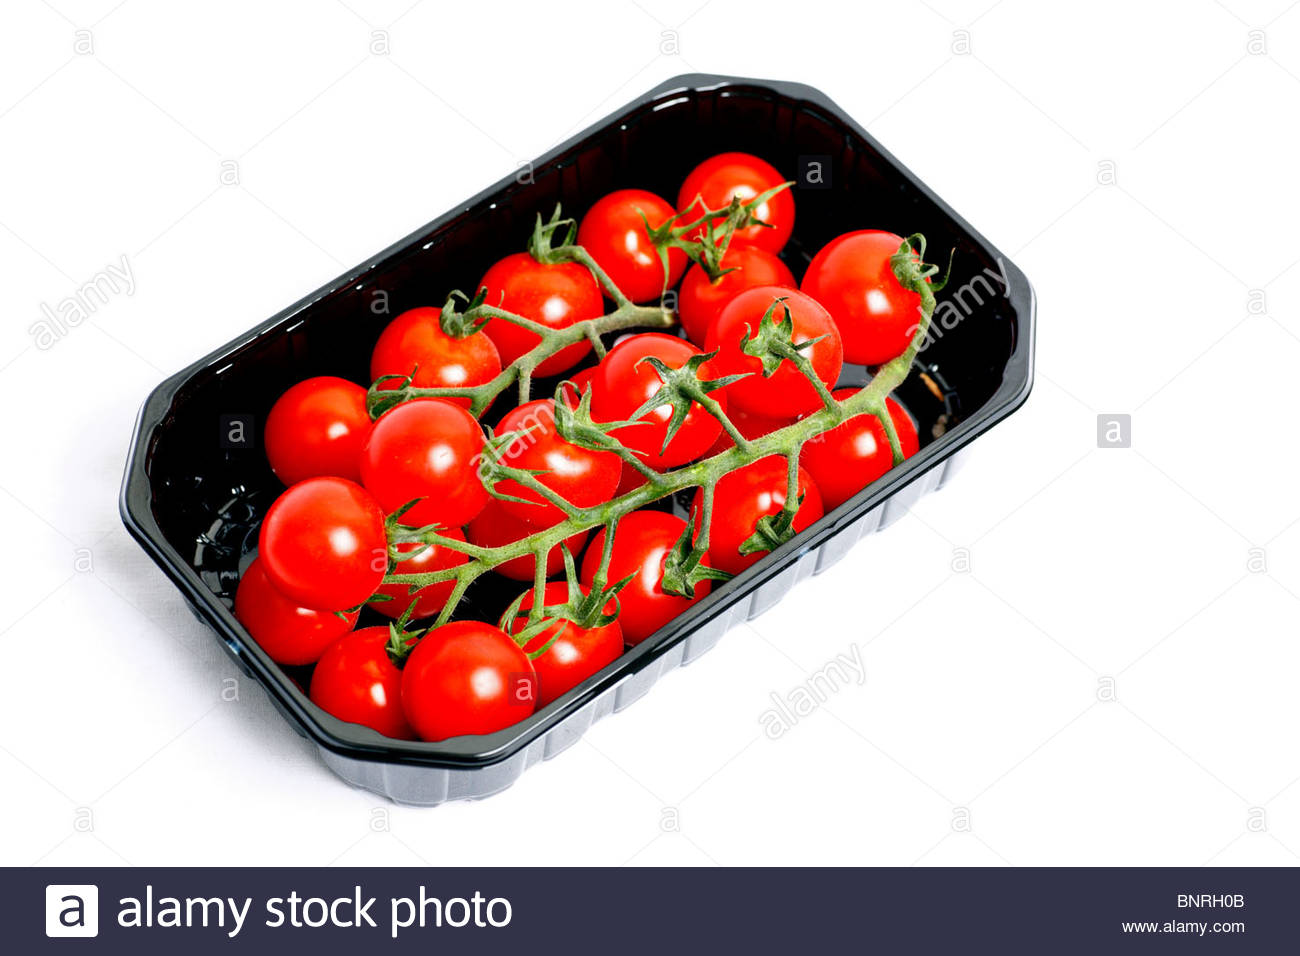 Cherry tomatoes in tray Stock Photo